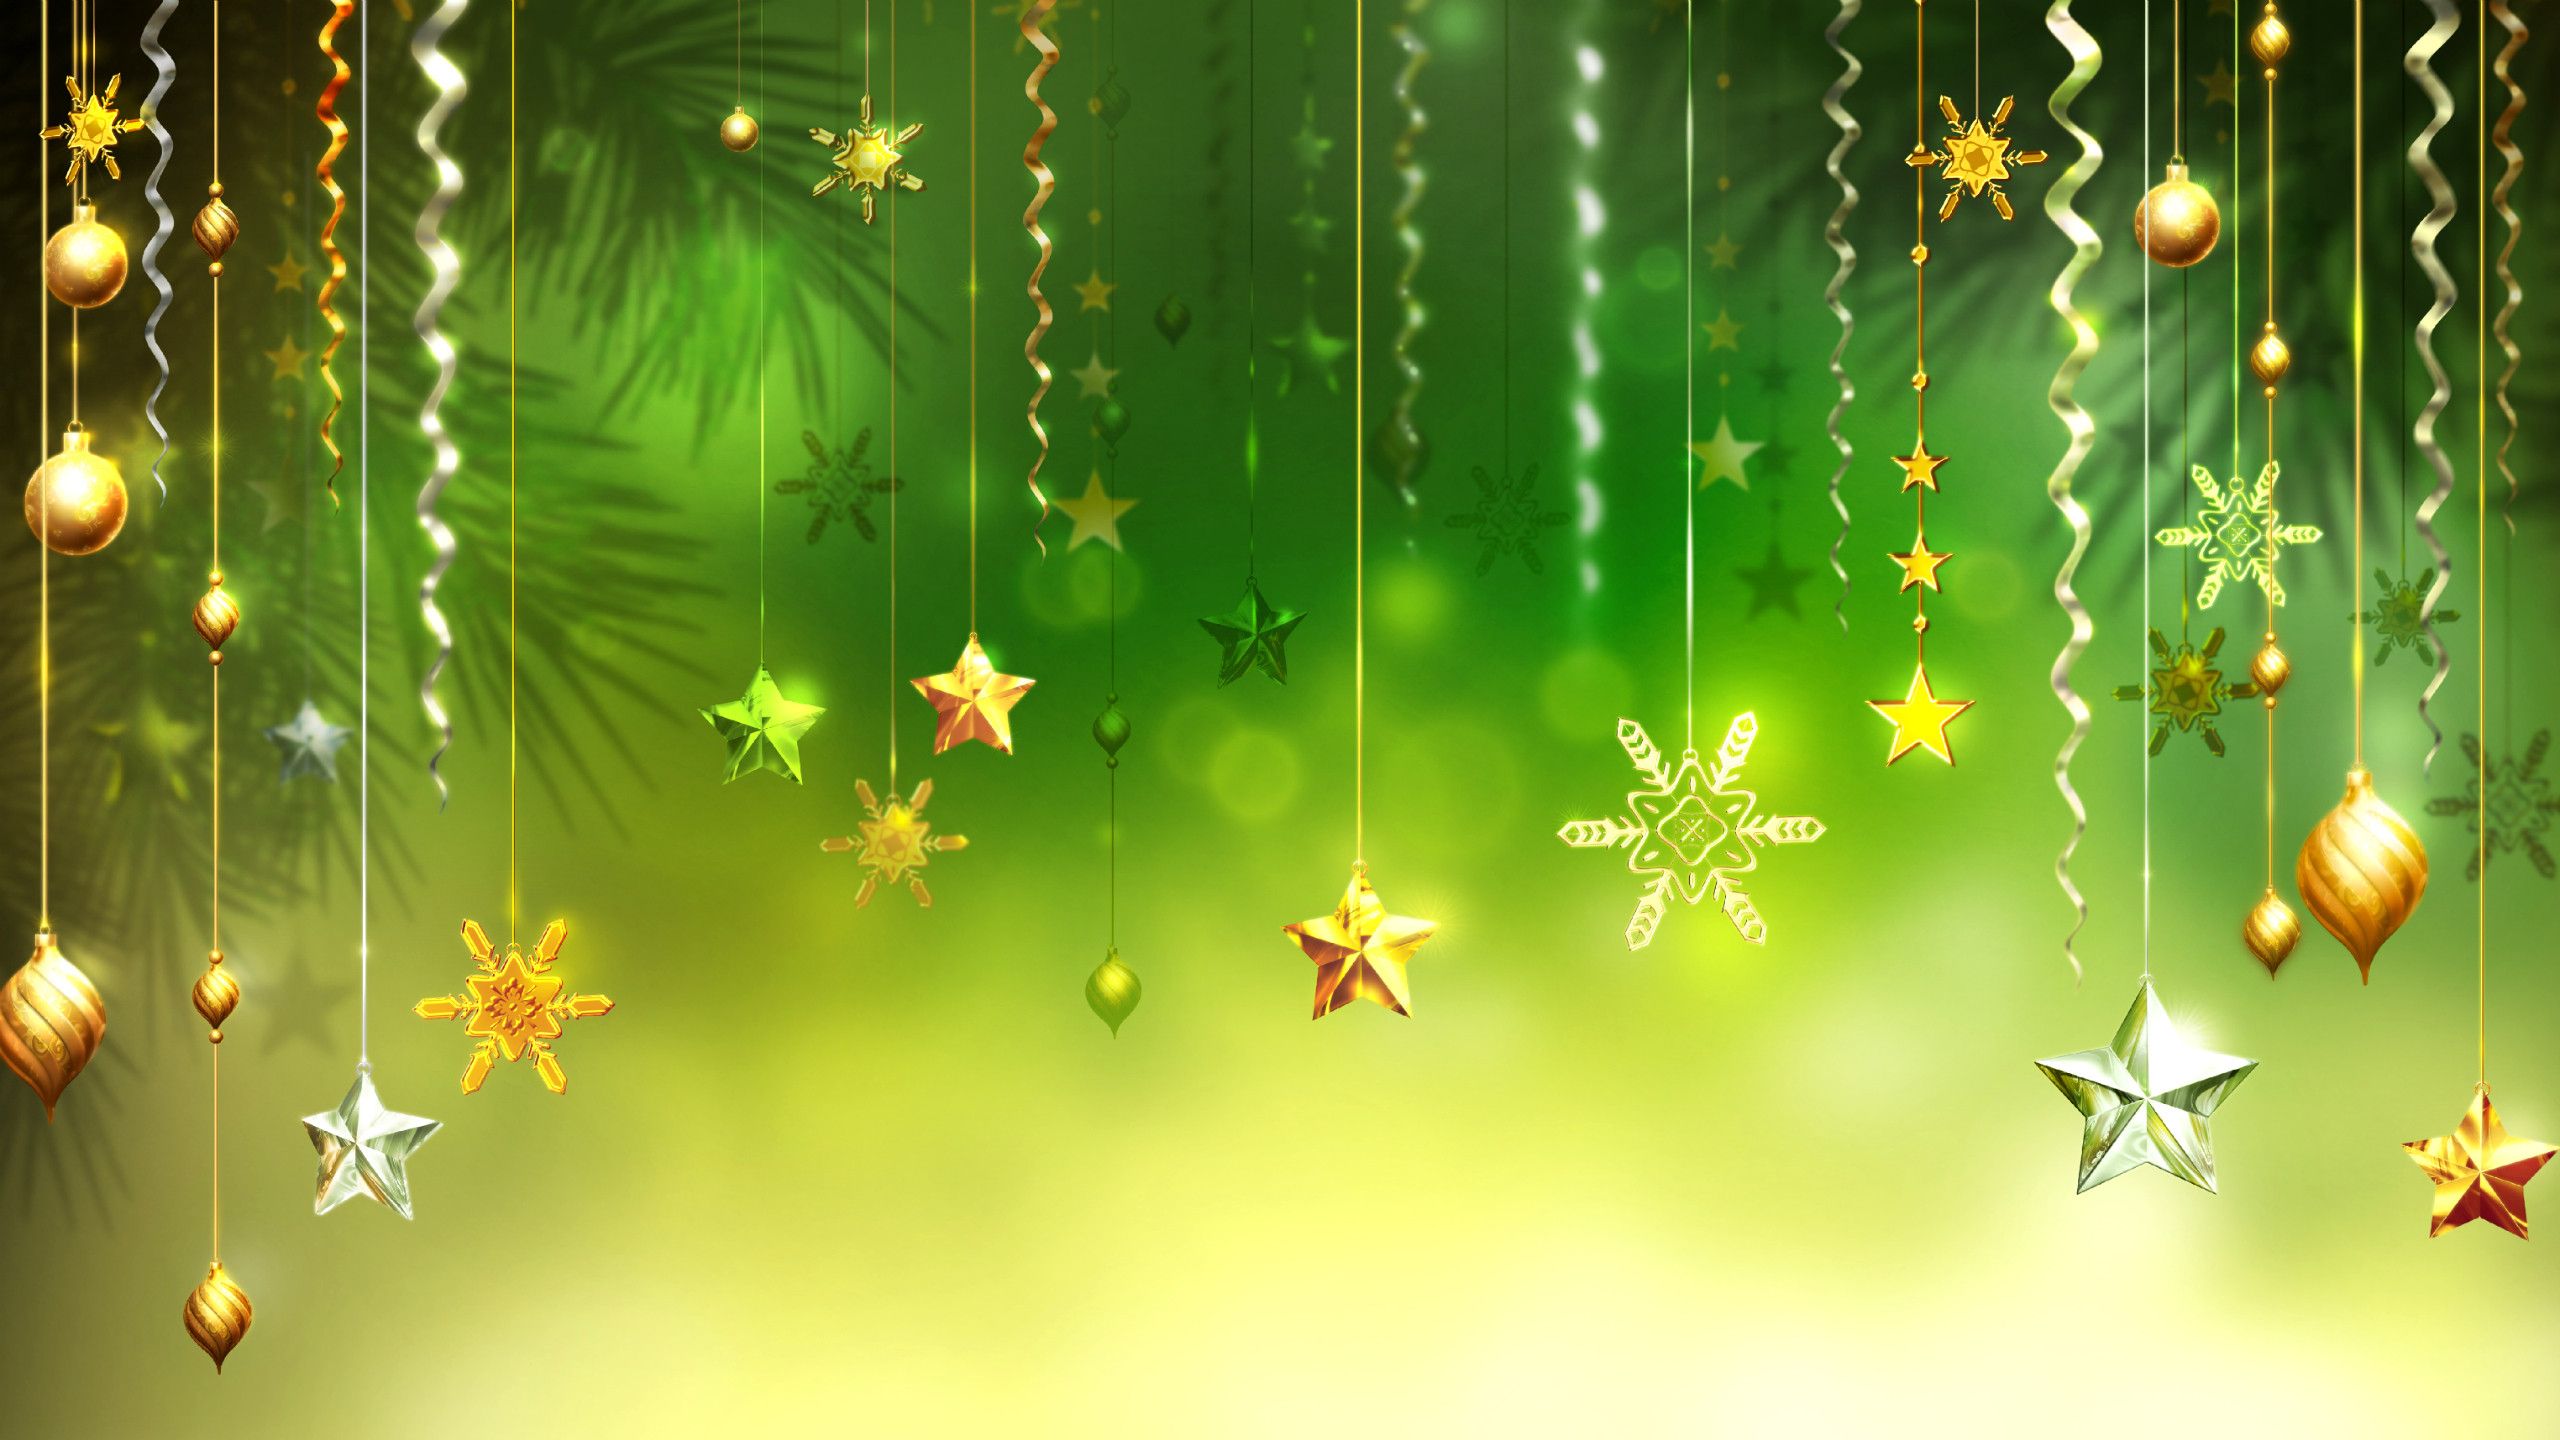 2015 christmas background - wallpapers, images, photos, pictures